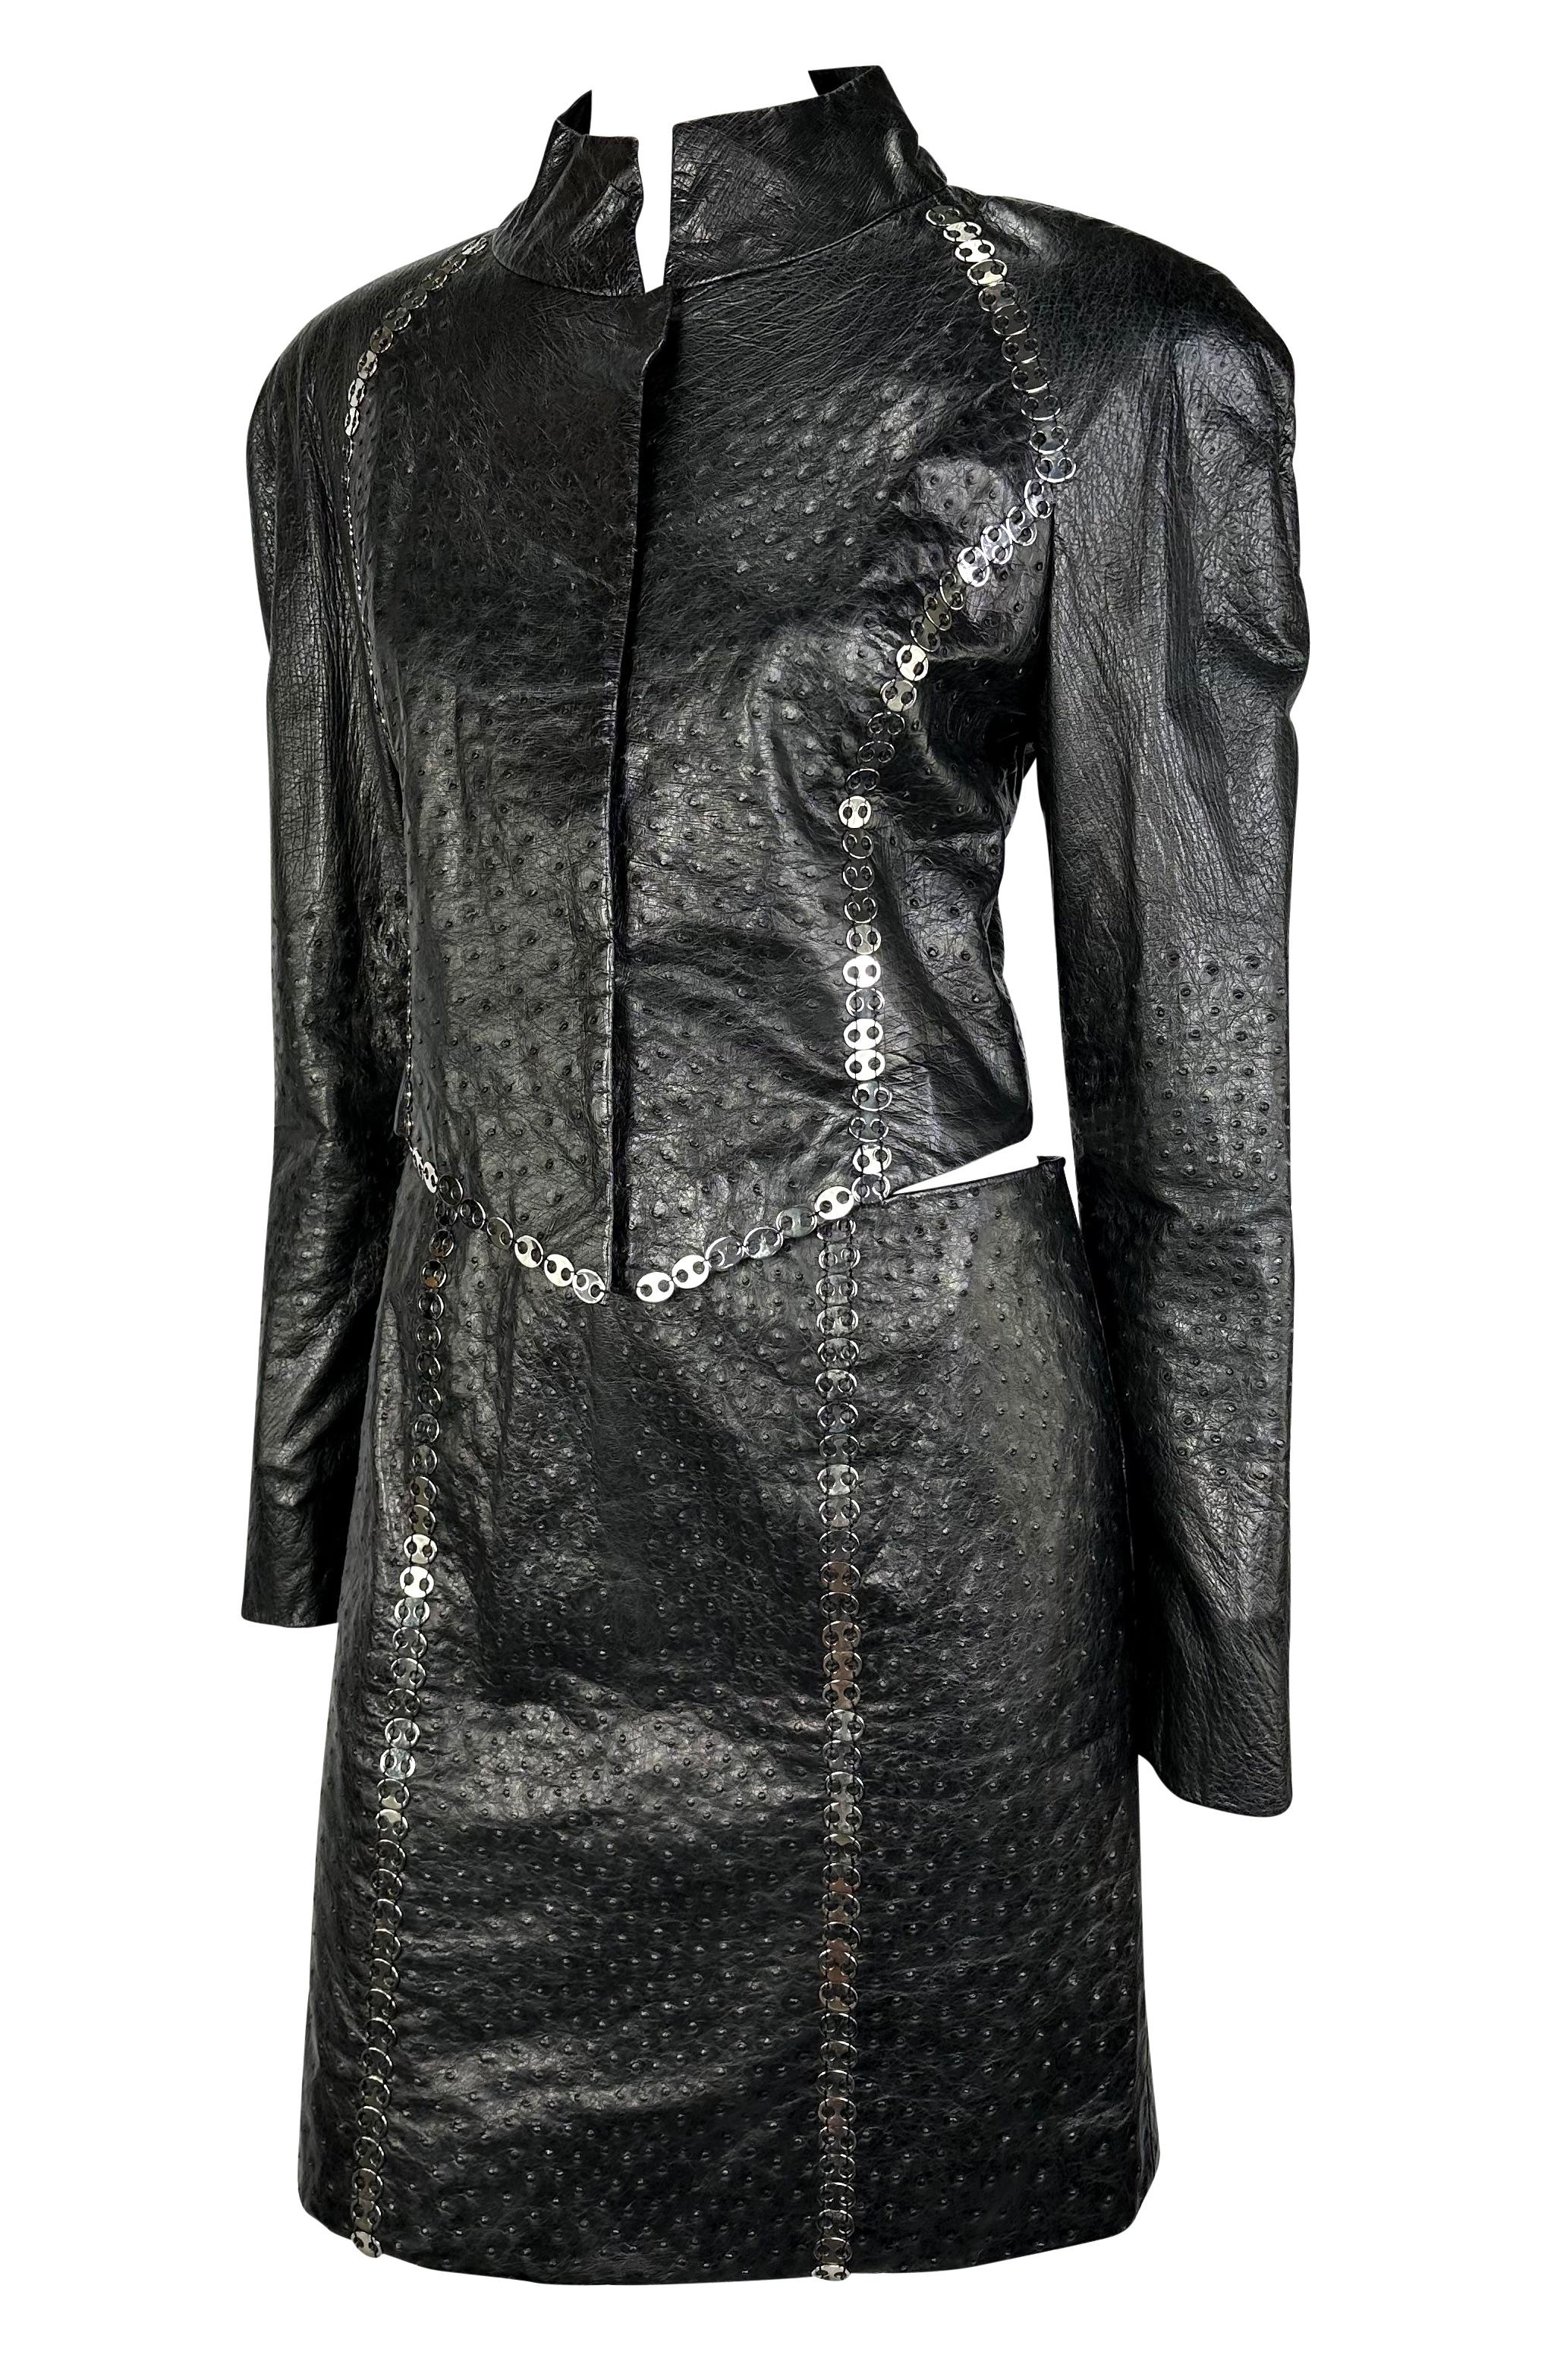 Presenting an incredible black ostrich leather Paco Rabanne Haute Couture skirt set. From the early 1990s, this absolutely stunning custom set is constructed entirely of black ostrich leather and is accented with silver Paco Rabanne silver-tone